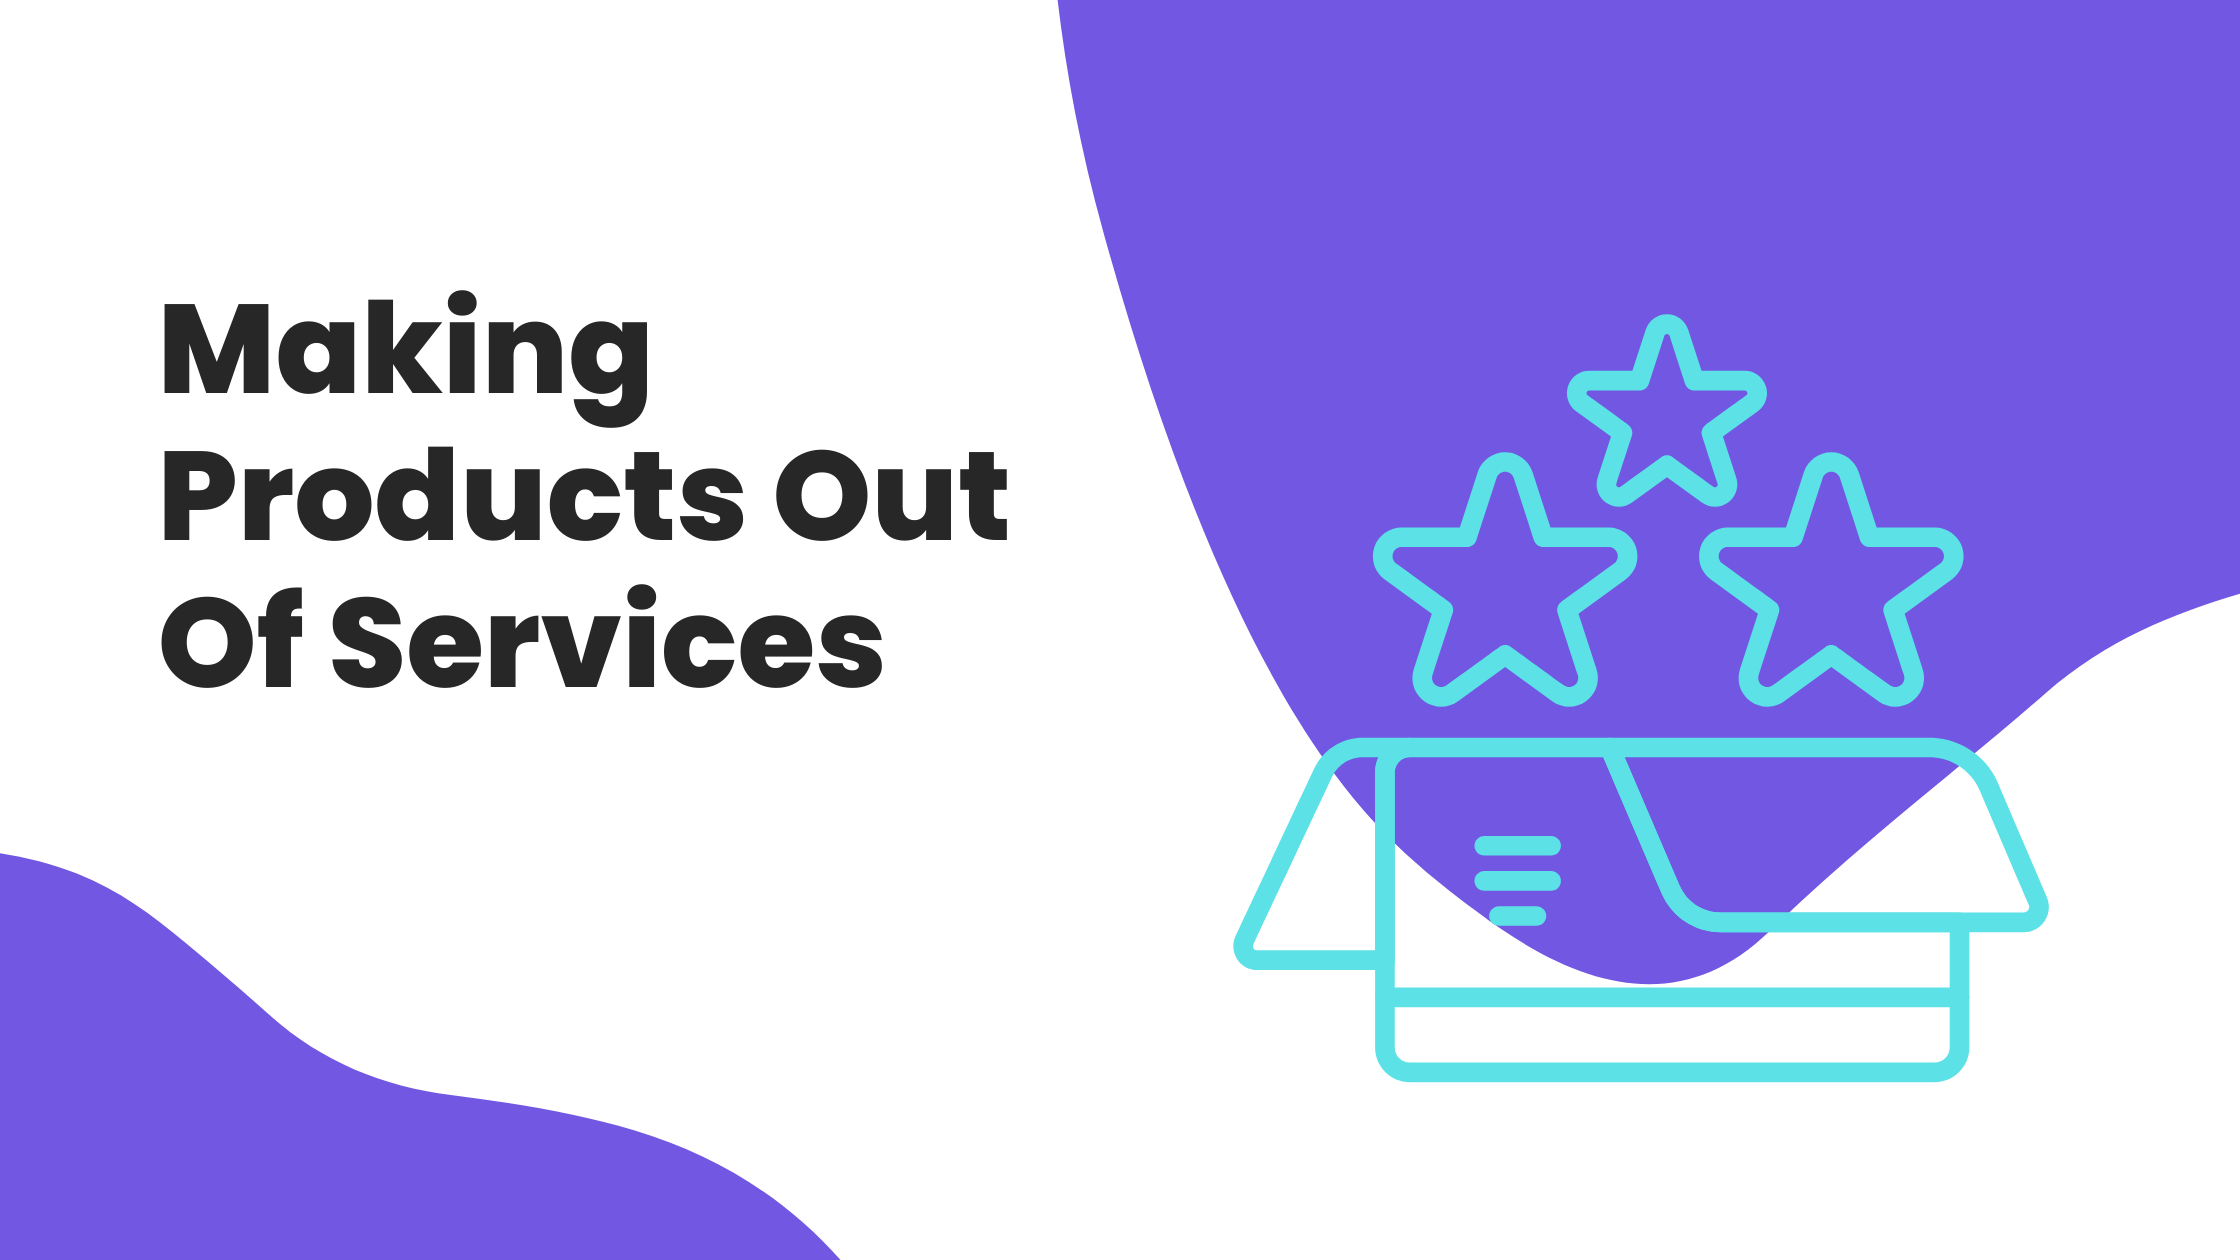 Making Products Out Of Services